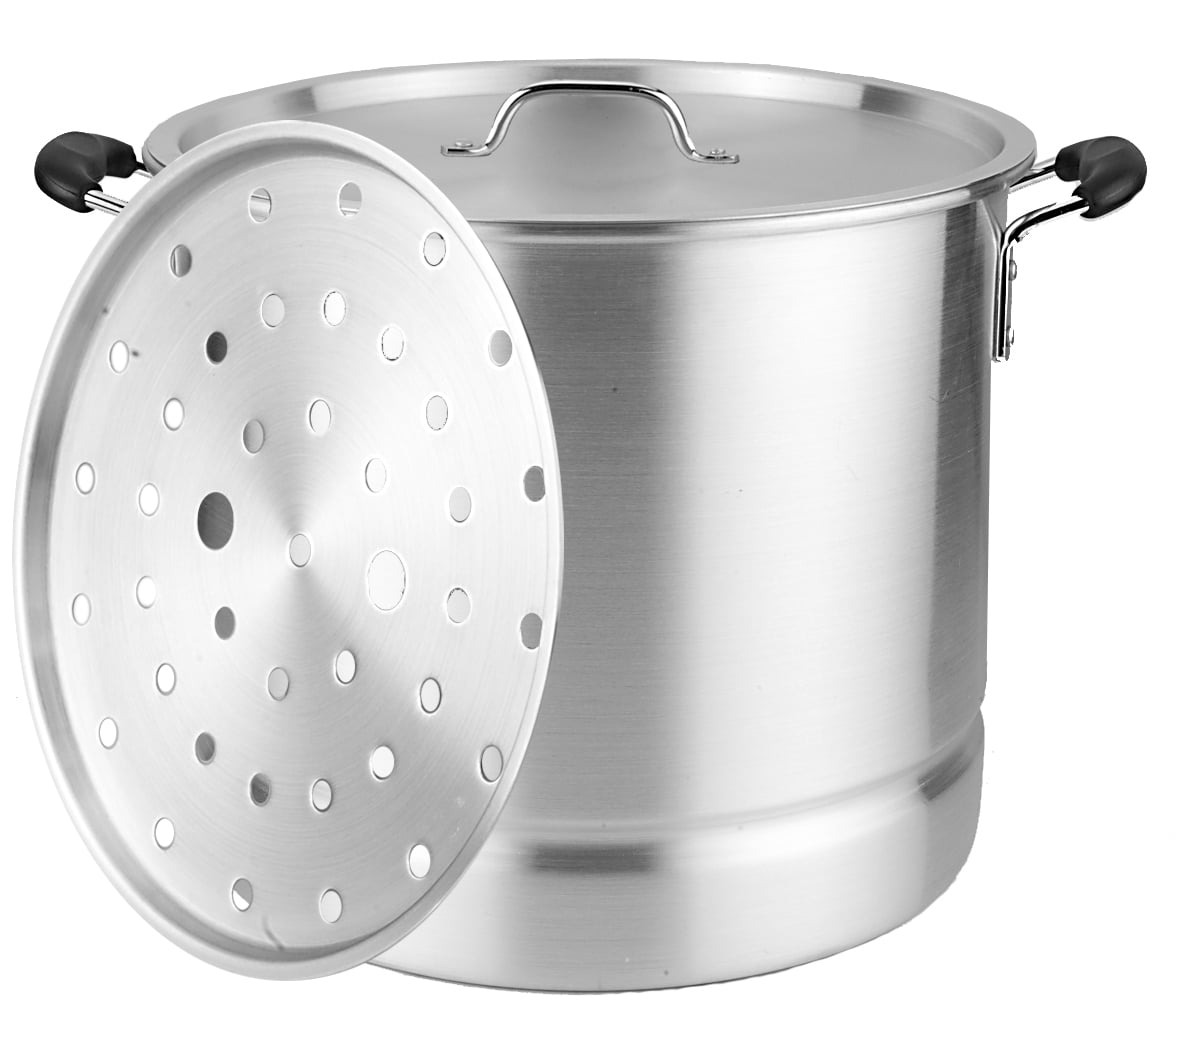 ANGELES HOME 4.2 qt. Stainless Steel Stock Pot in Silver with 2 qt. Steamer  Insert and Lid M52-8KC607 - The Home Depot